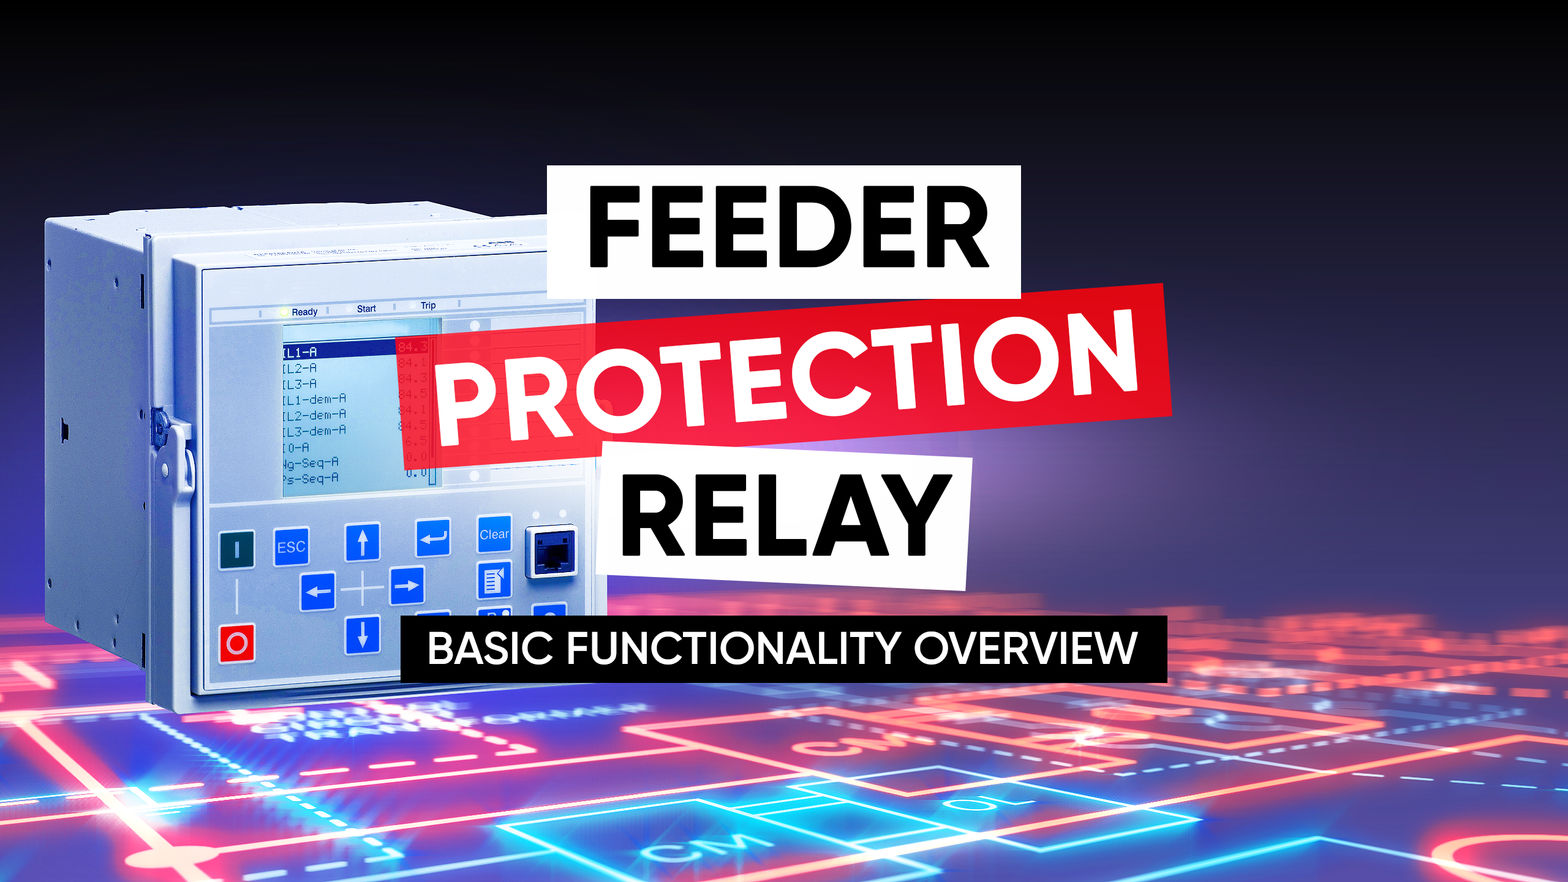 Feeder Protection Relay Training